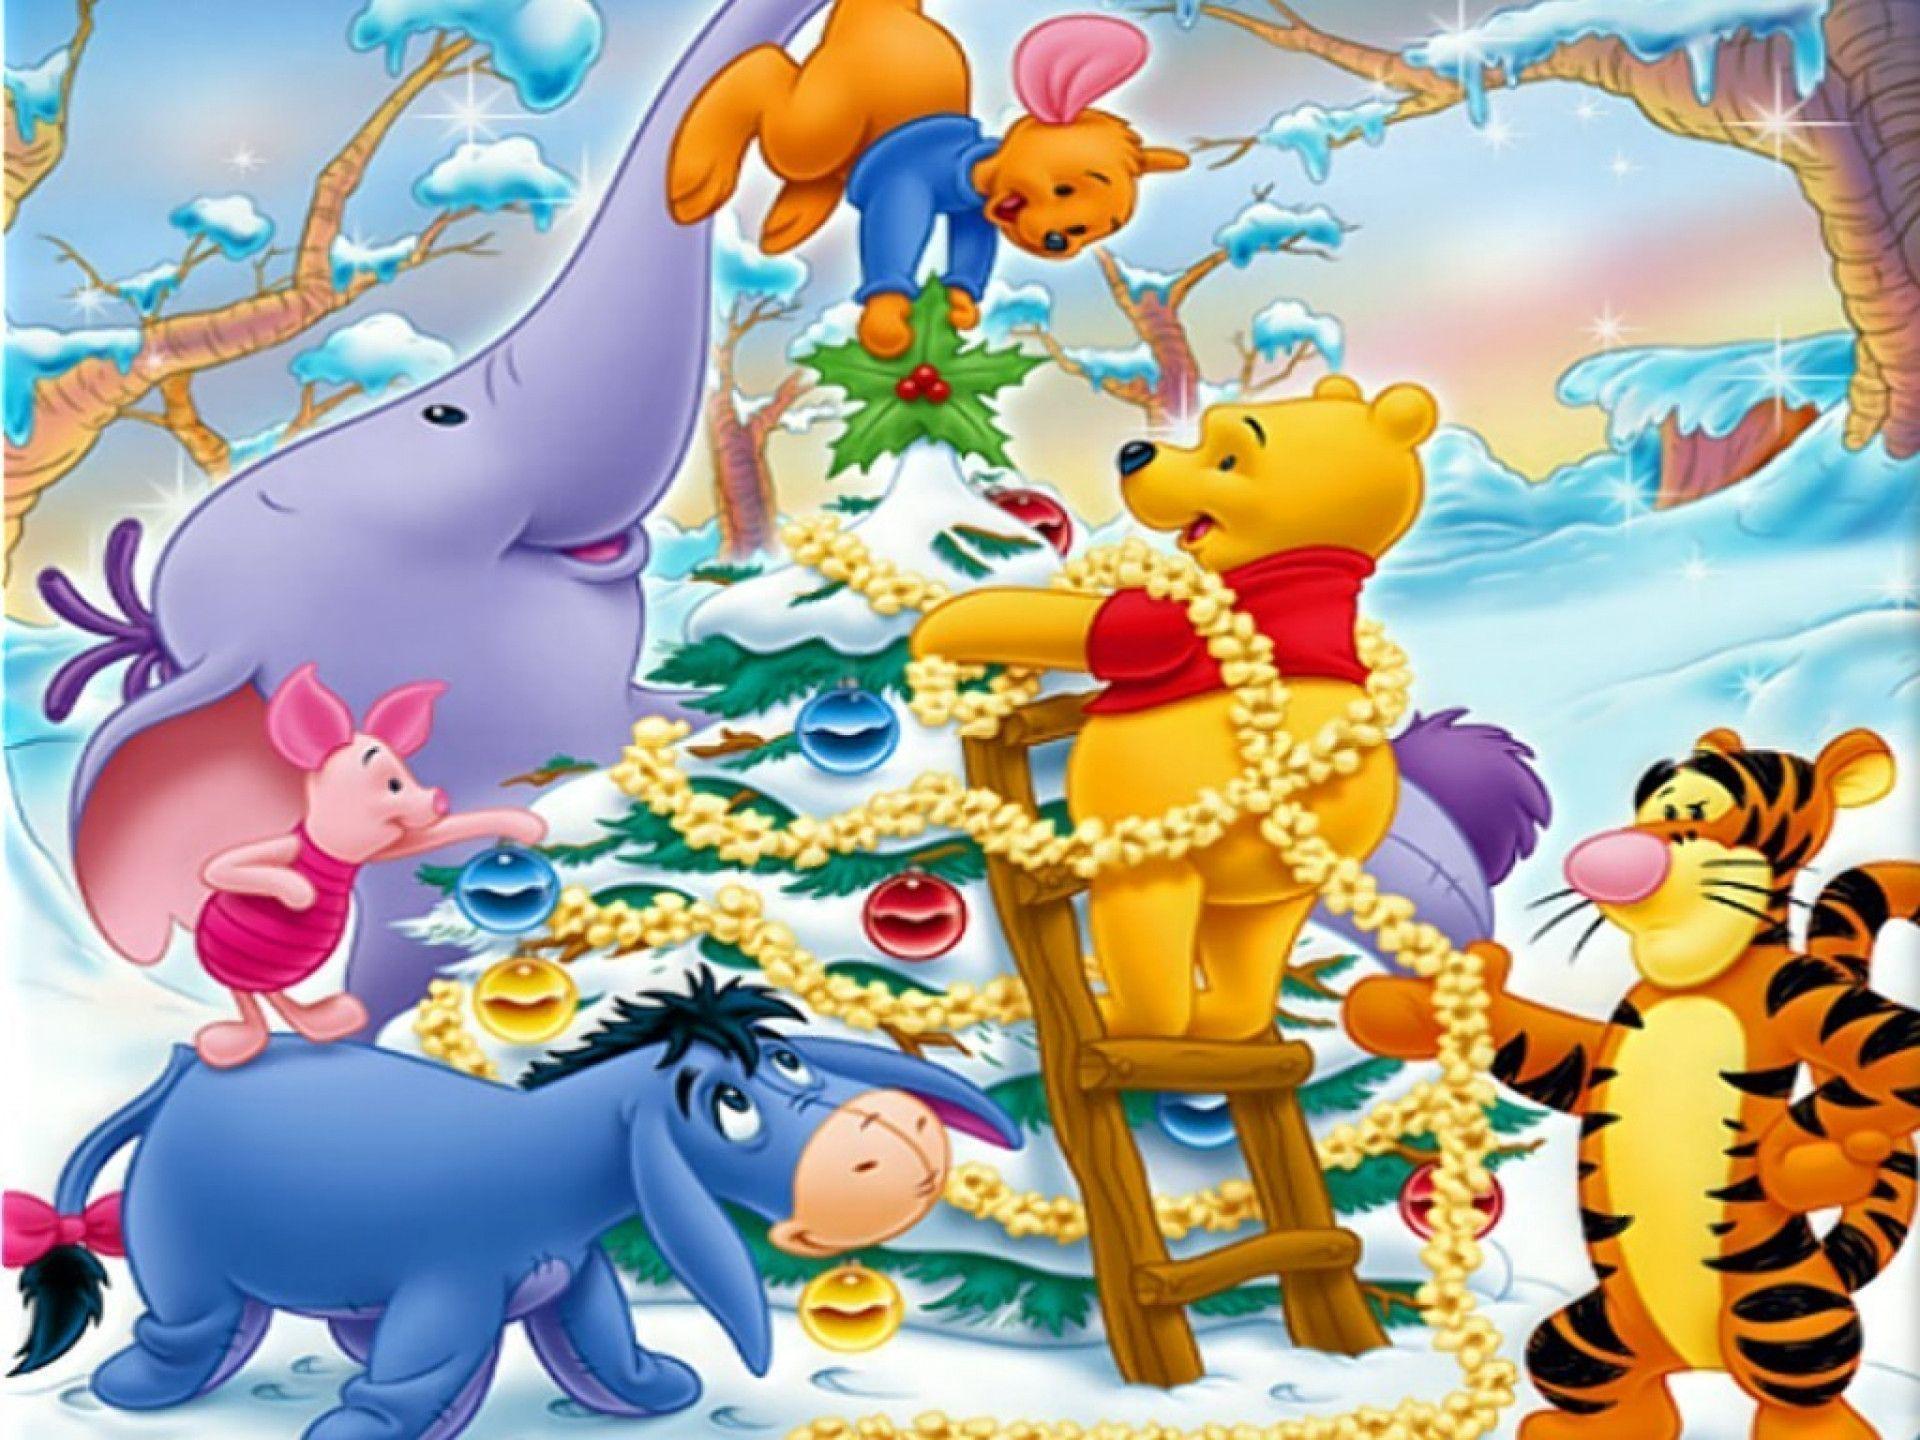 Wallpaper For > Winnie The Pooh Christmas Wallpaper Background